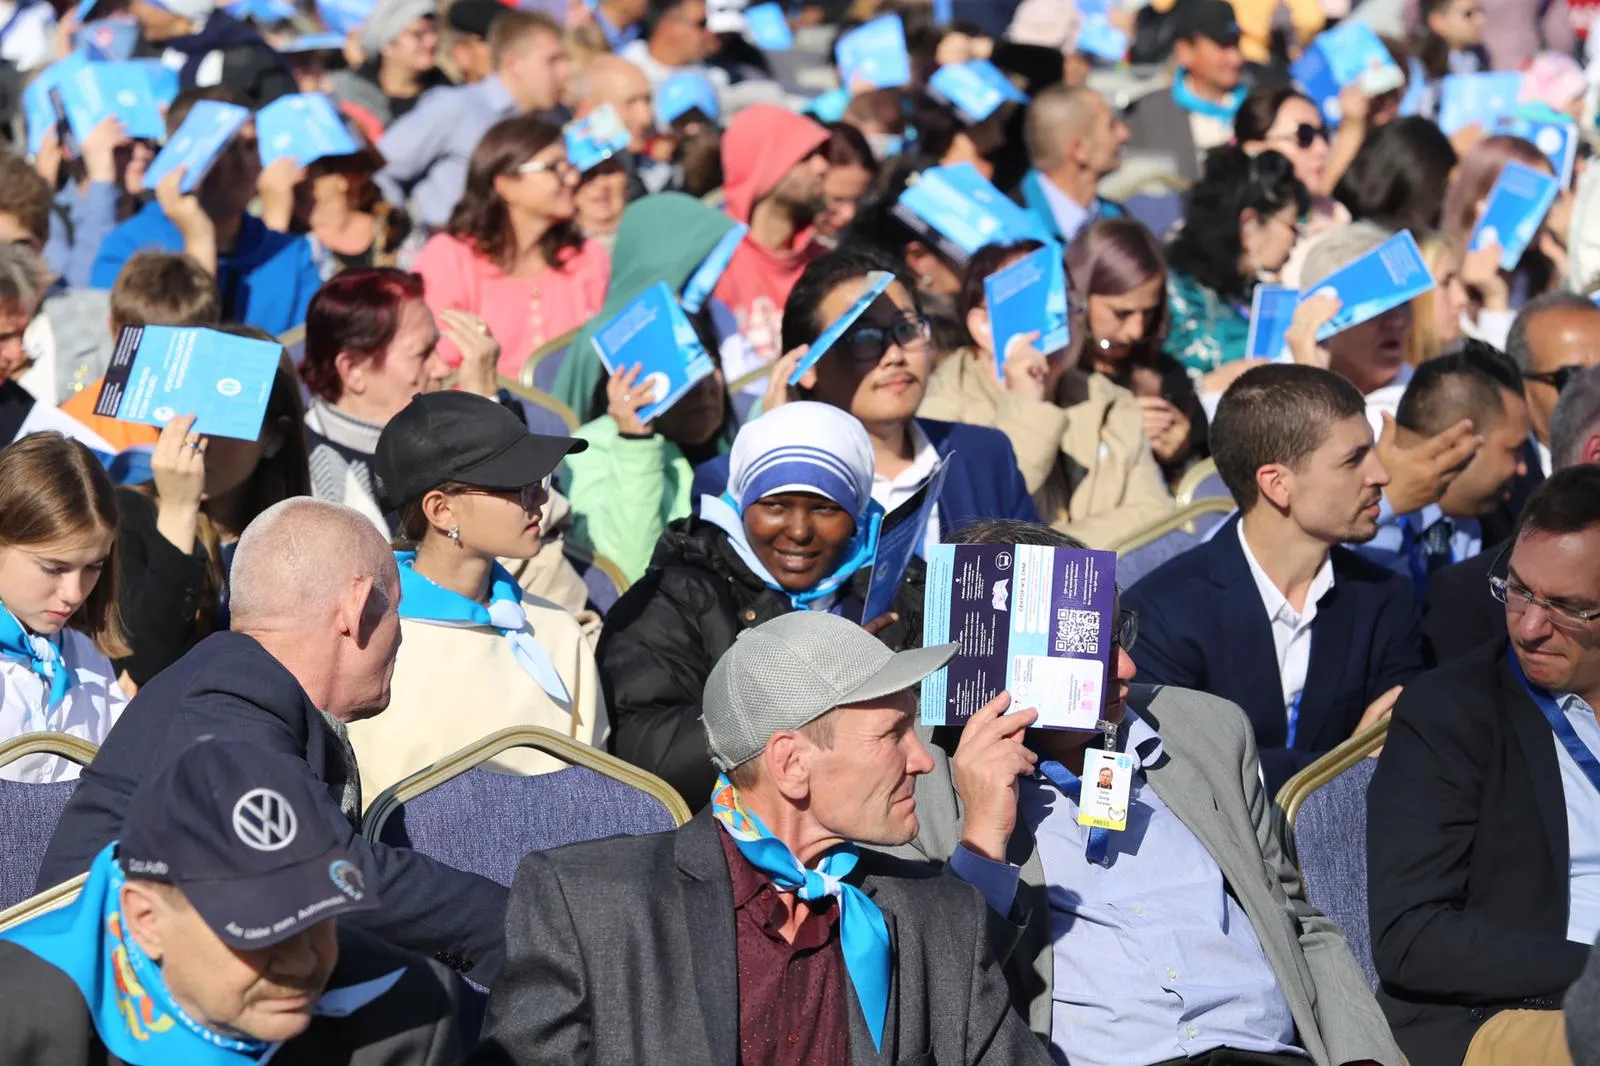 Participants at the outdoor Mass in Nur-Sultan, Kazakhstan, on Sept. 14, 2022?w=200&h=150